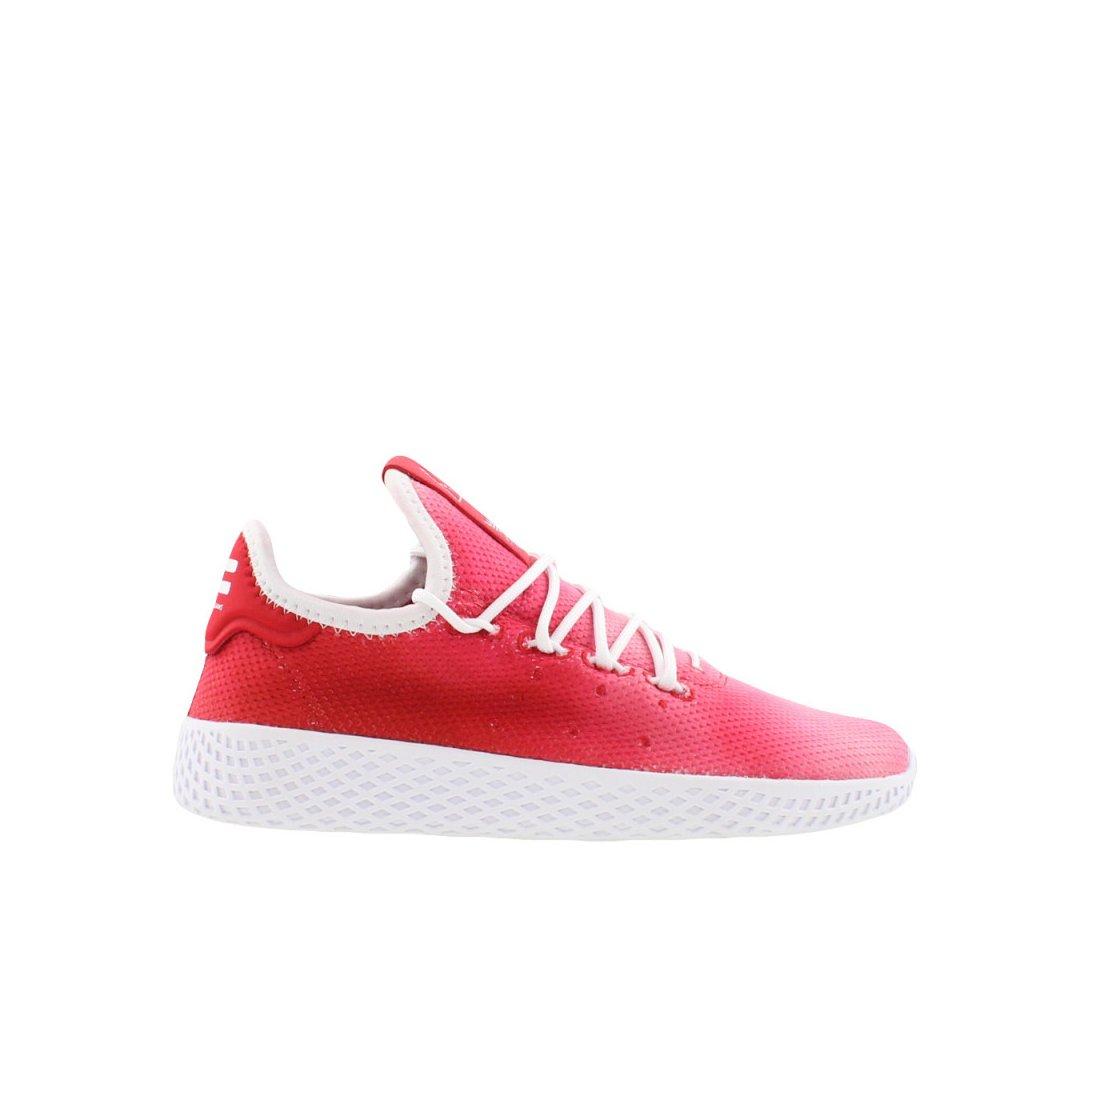 adidas pharrell williams shoes red